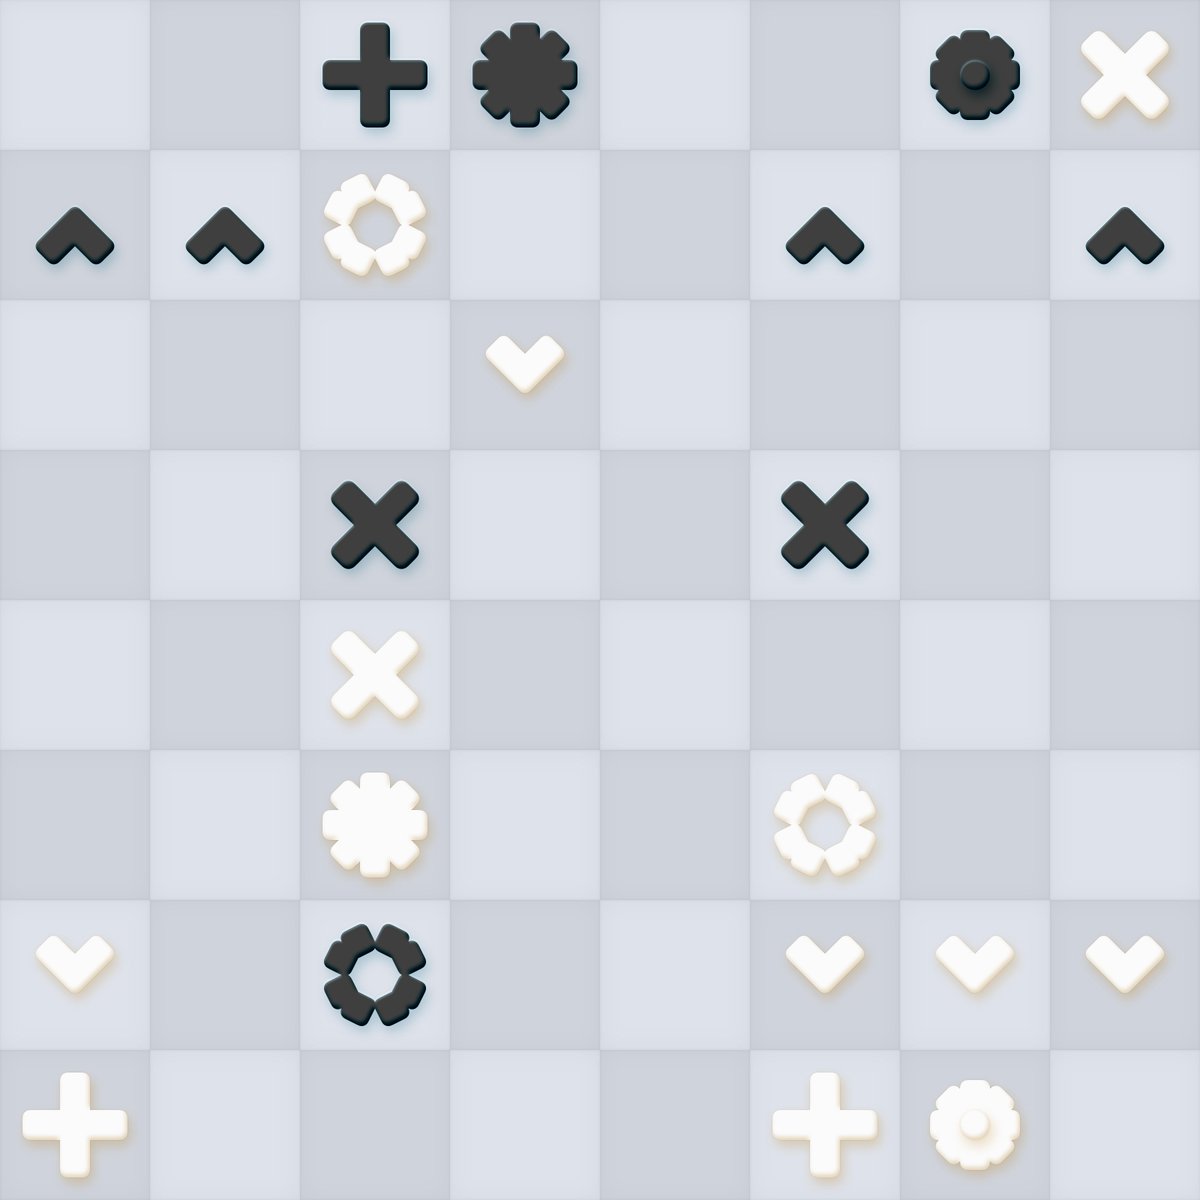 I realized chess pieces can be redesigned to be purely geometric attack directions